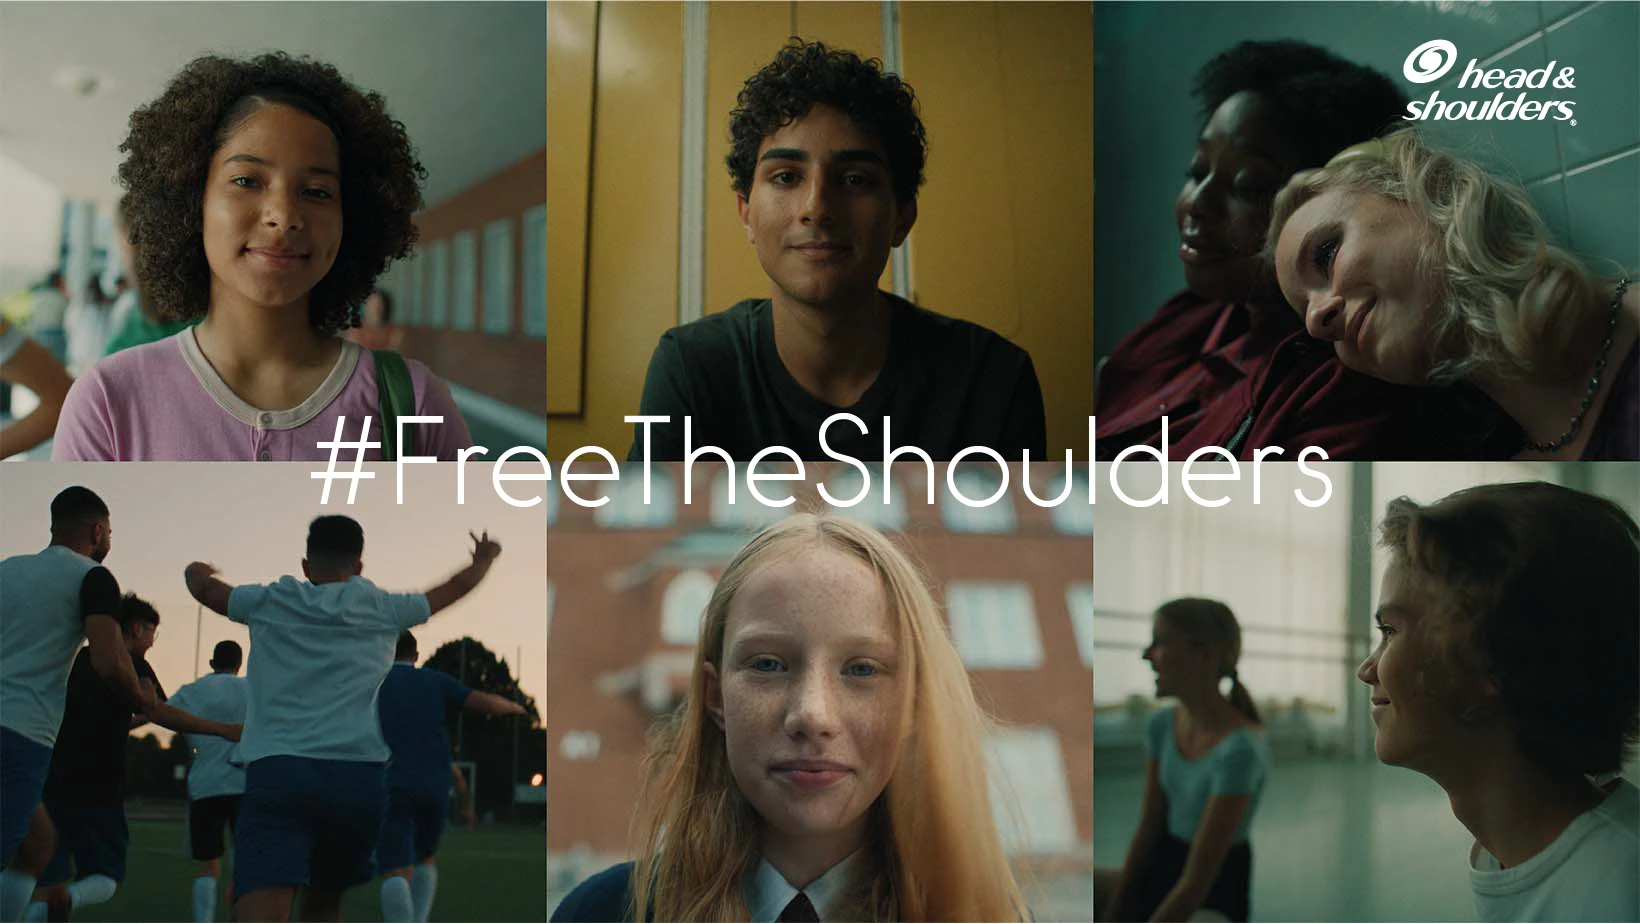 Head & Shoulders, Weight of the Flake, Anti-Bullying Campaign, Teen Bullying, Dandruff Care, Empowering Teenagers, Bullying Awareness, Diana Award, Teen Mental Health, campaigns of the world